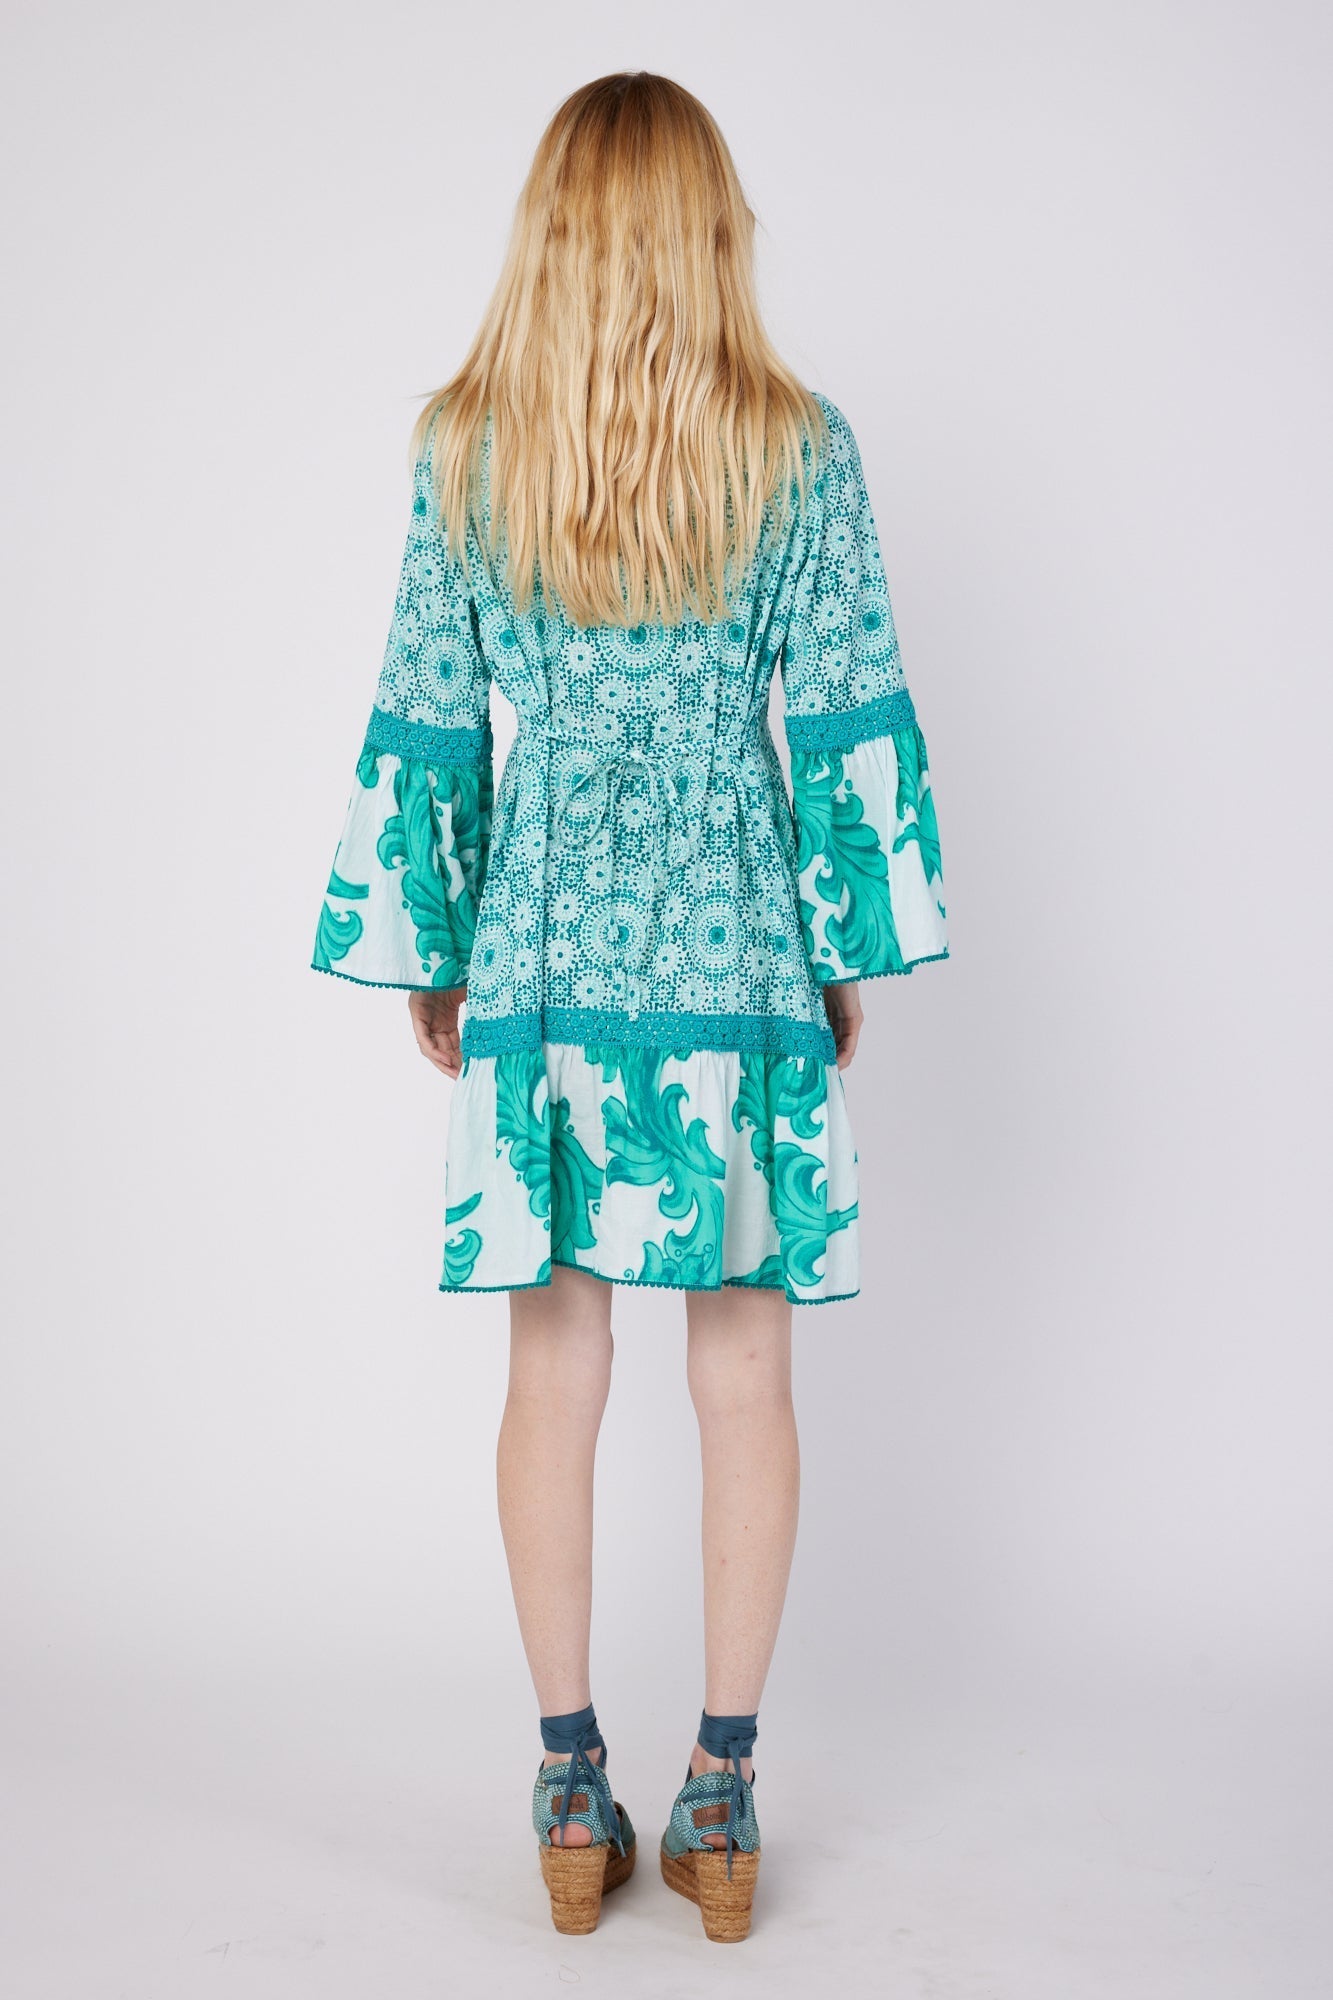 ModaPosa Ilaria 3/4 Flared Sleeve Drop Waist Hand Embroidered Knee Length Dress with Lace Trim in Green Swirl Combo . Discover women's resort dresses and lifestyle clothing inspired by the Mediterranean. Free worldwide shipping available!